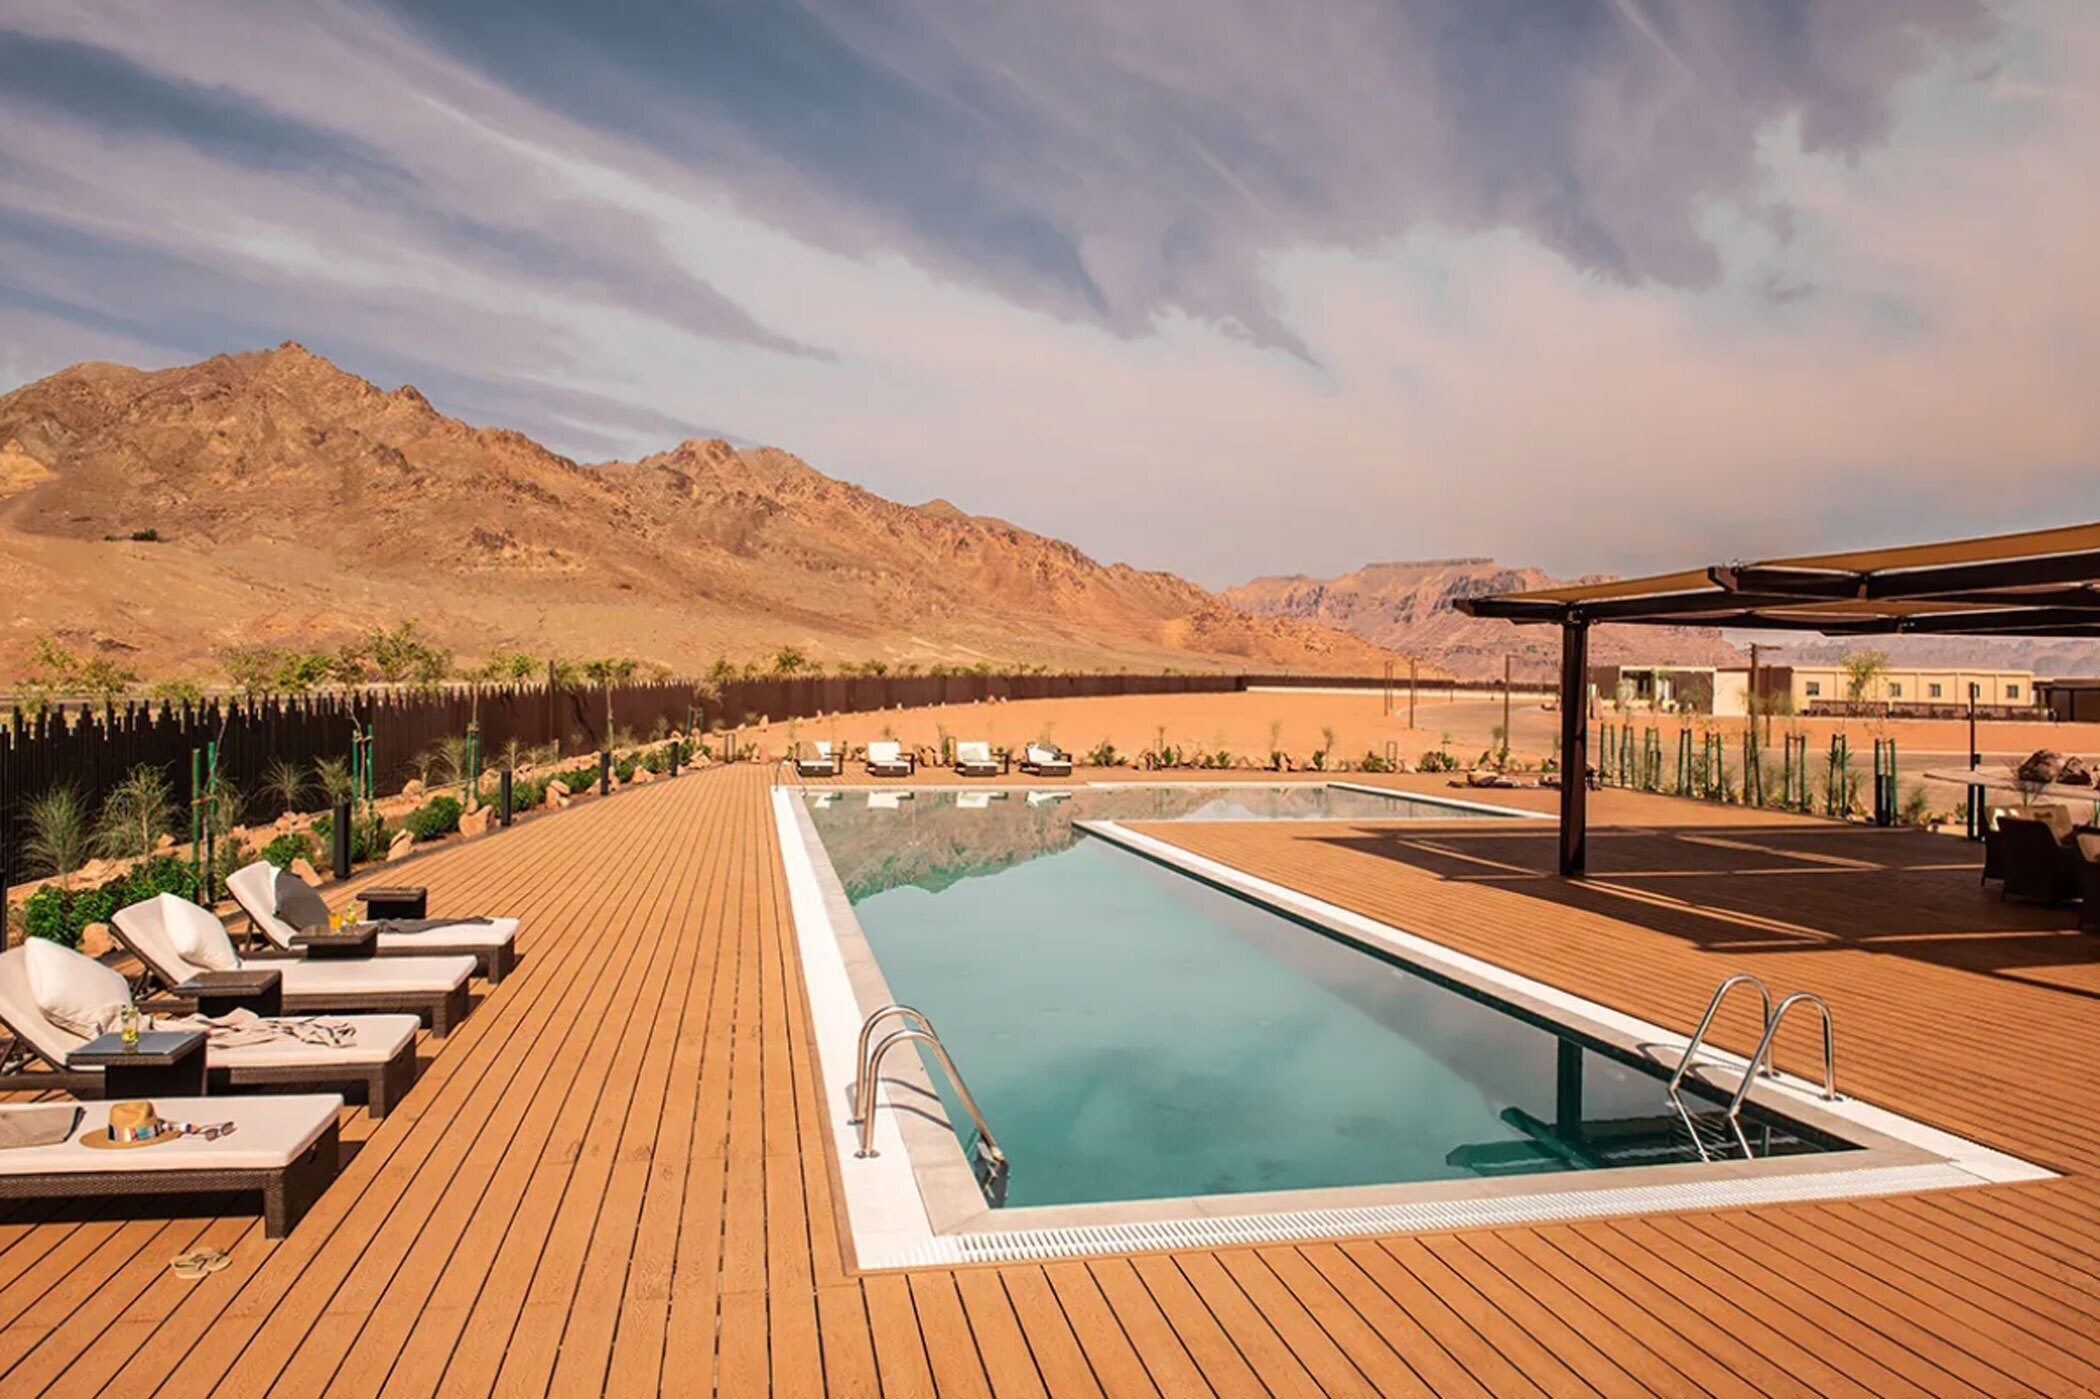 There are five Saudi Arabia giga-projects, including AlUla, covering 9,000 square miles and containing hotels such as Cloud7 Residence, designed to be sustainable and blend in with landscapes. (Kerten Hospitality)